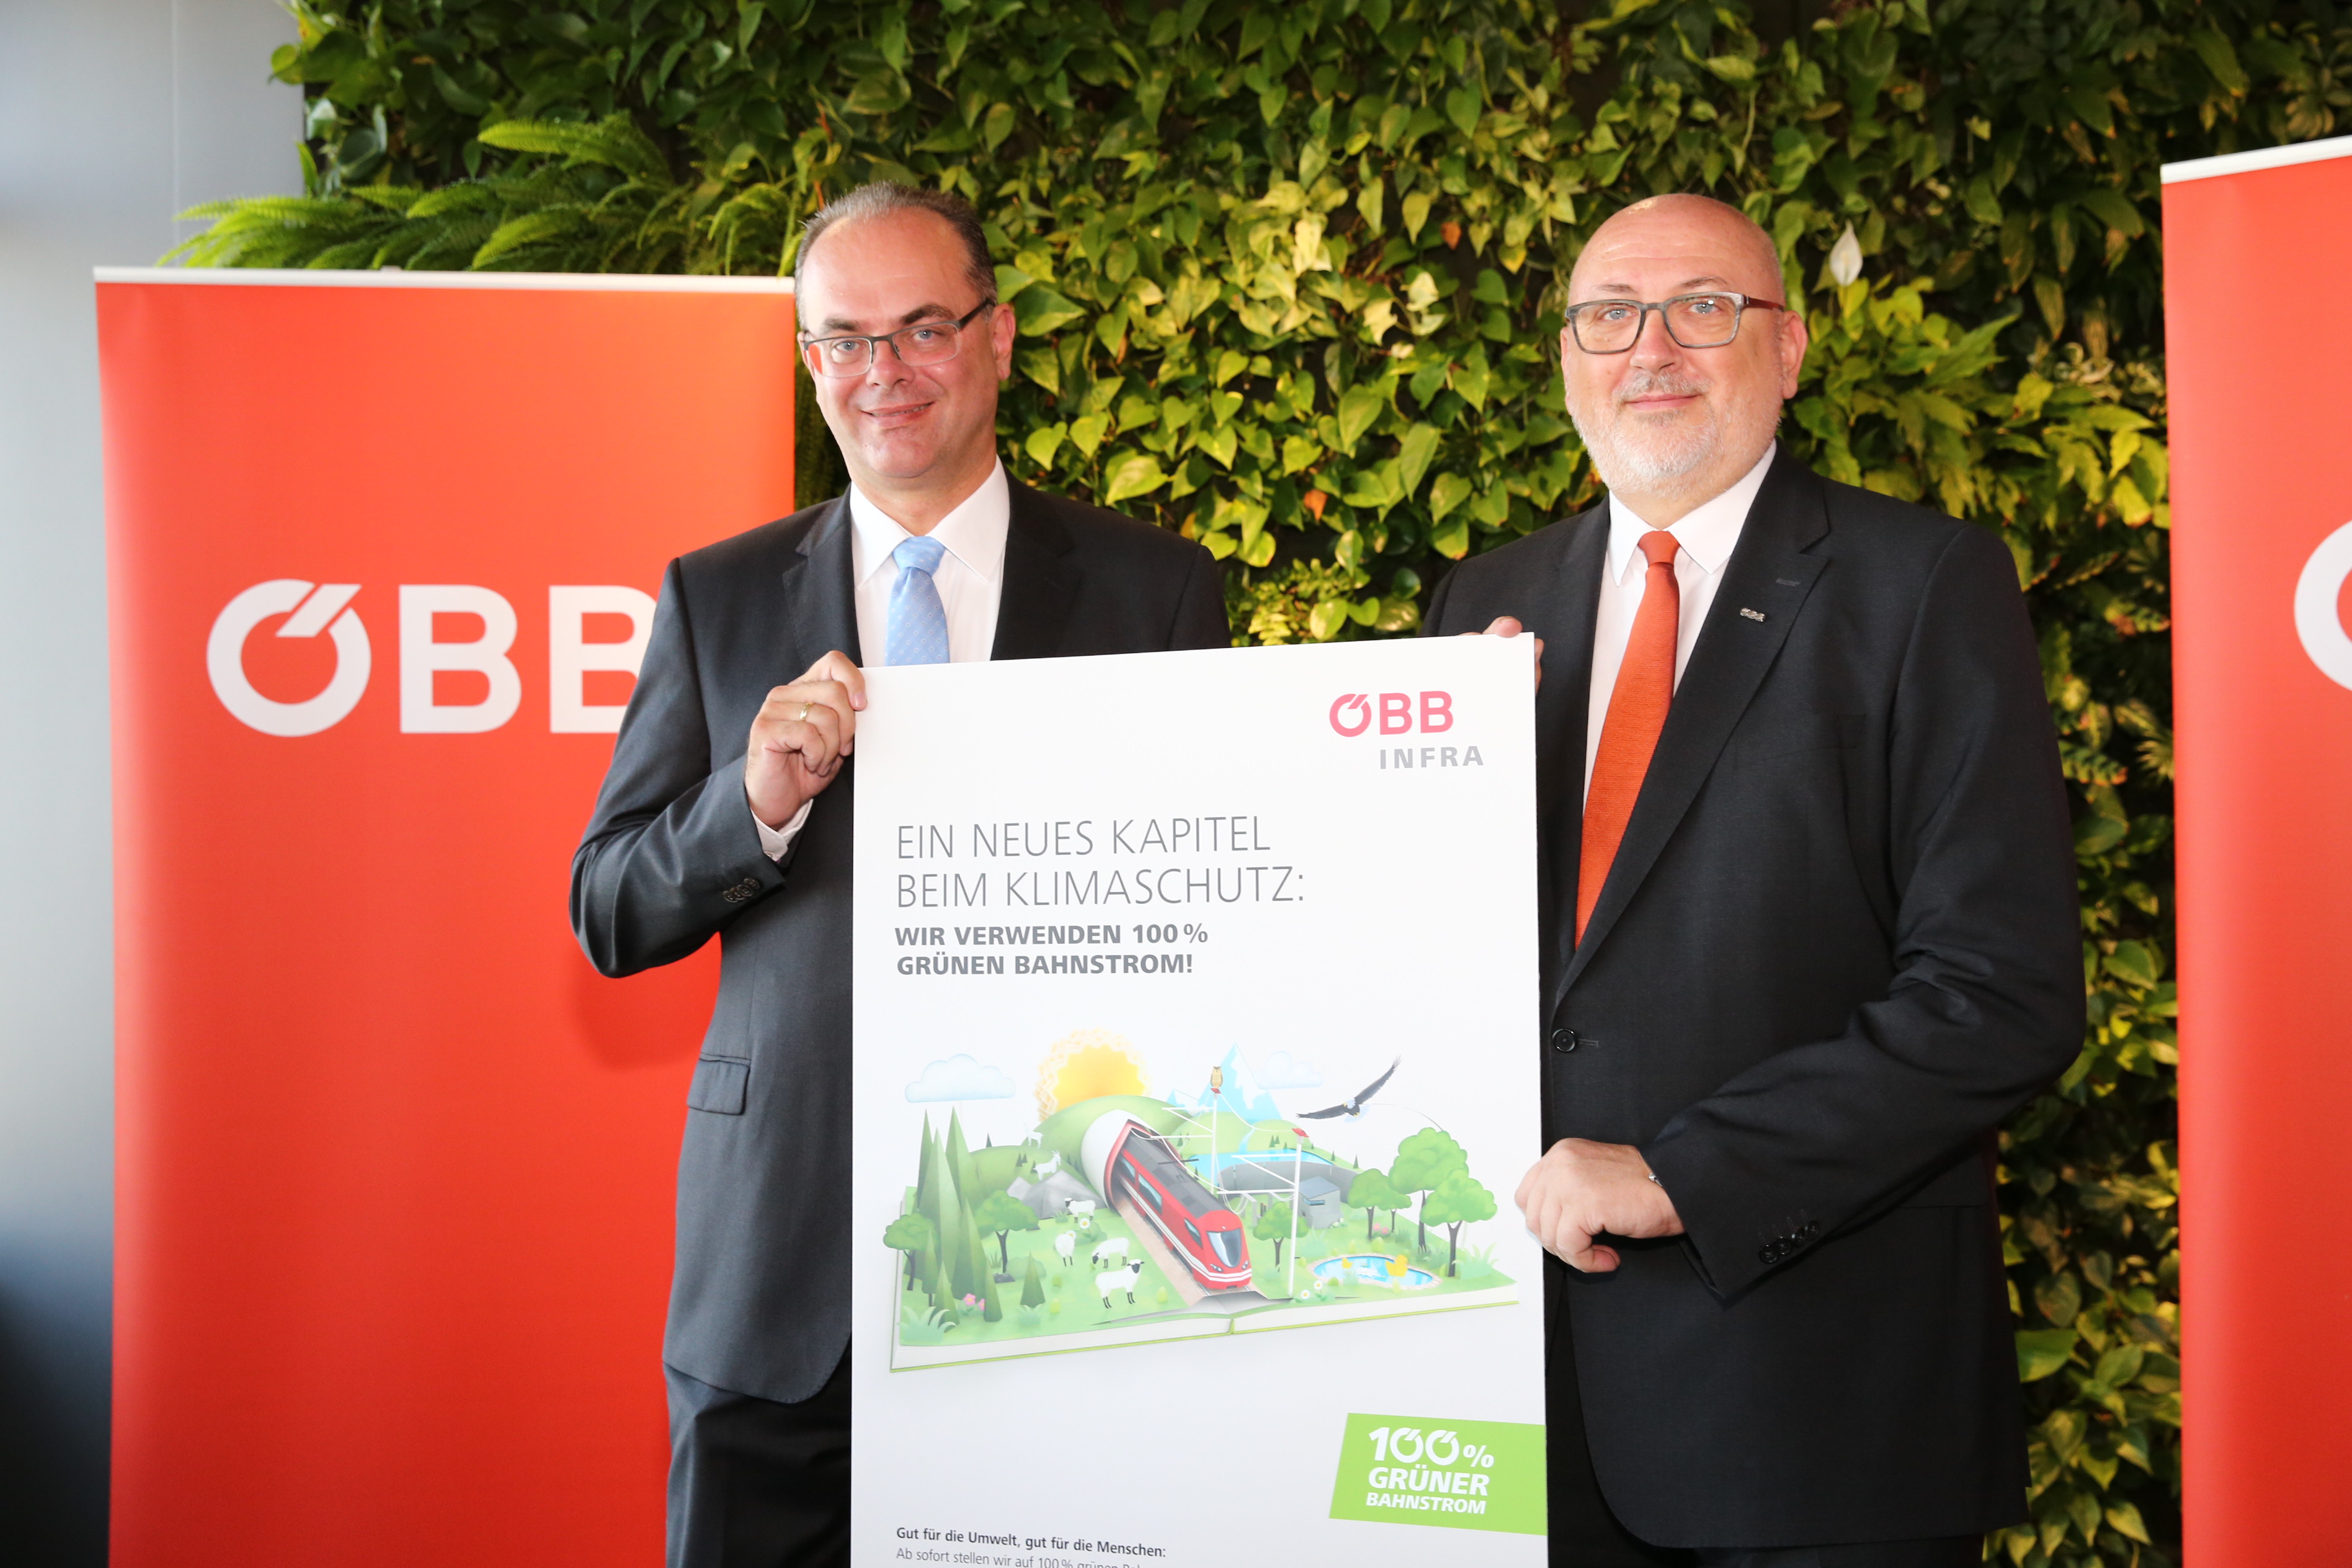 Greenpeace-ÖBB cooperation: 100 per cent green electricity for the railway